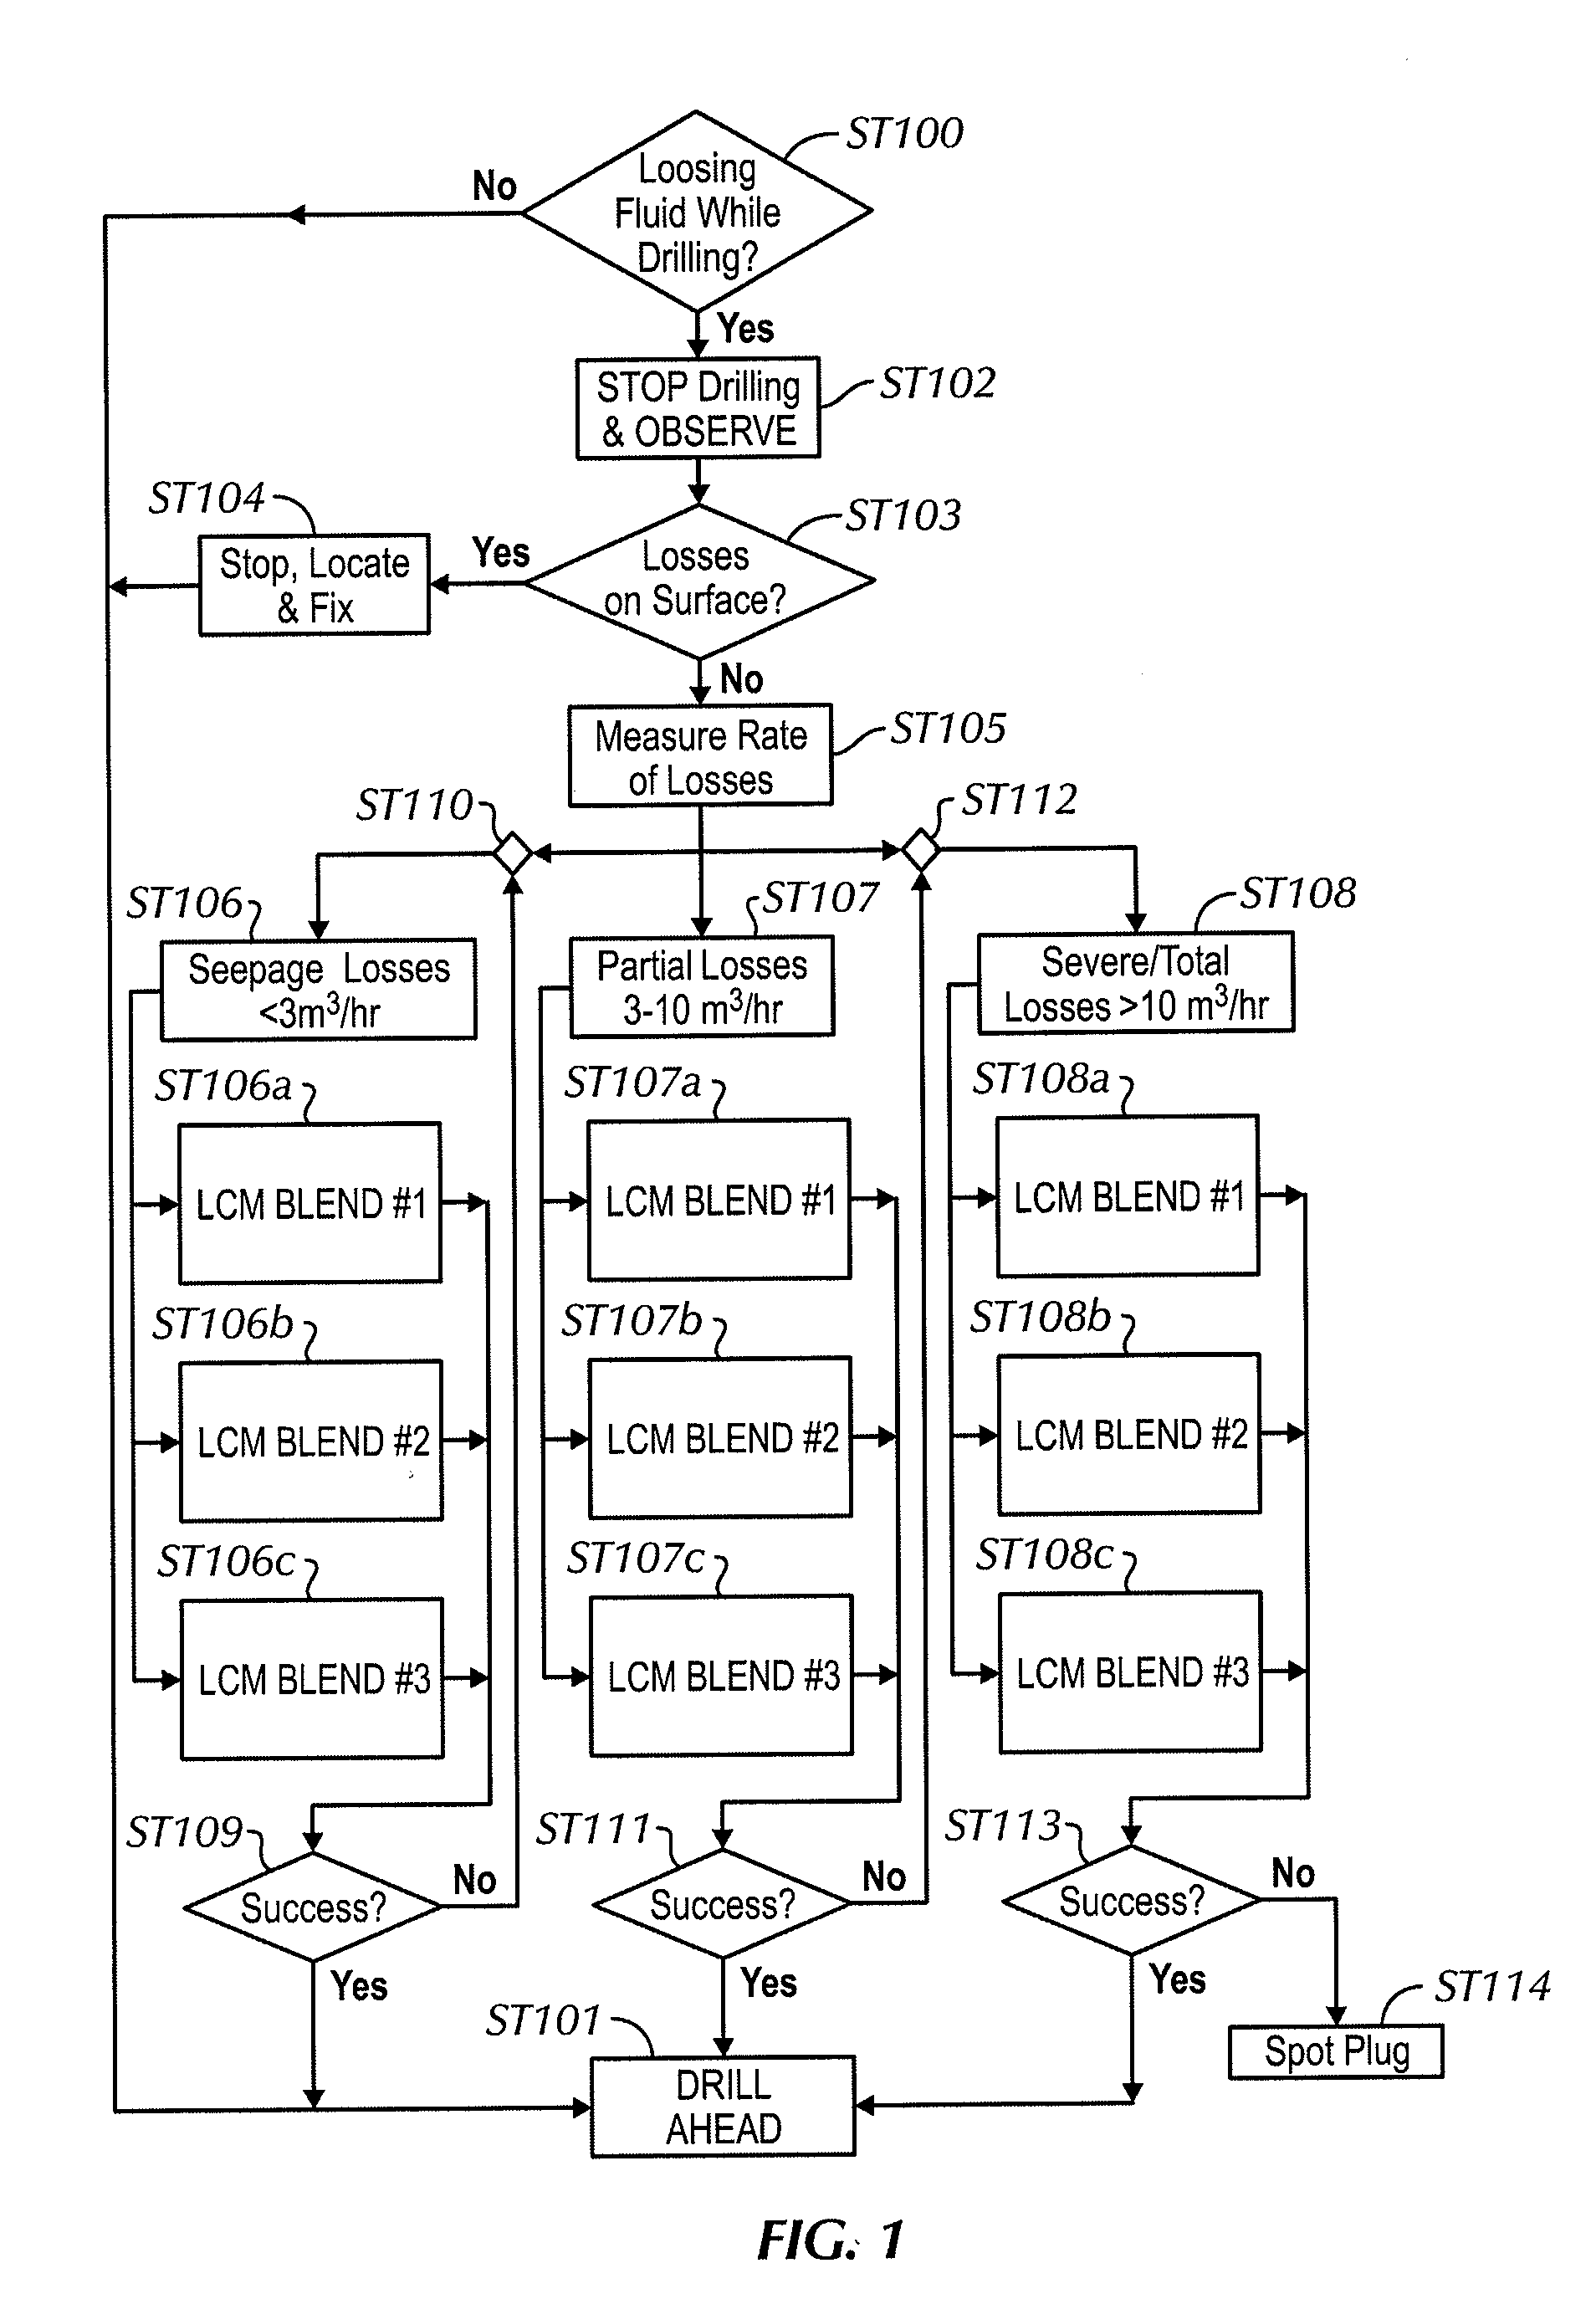 Methods of detecting, preventing, and remediating lost circulation